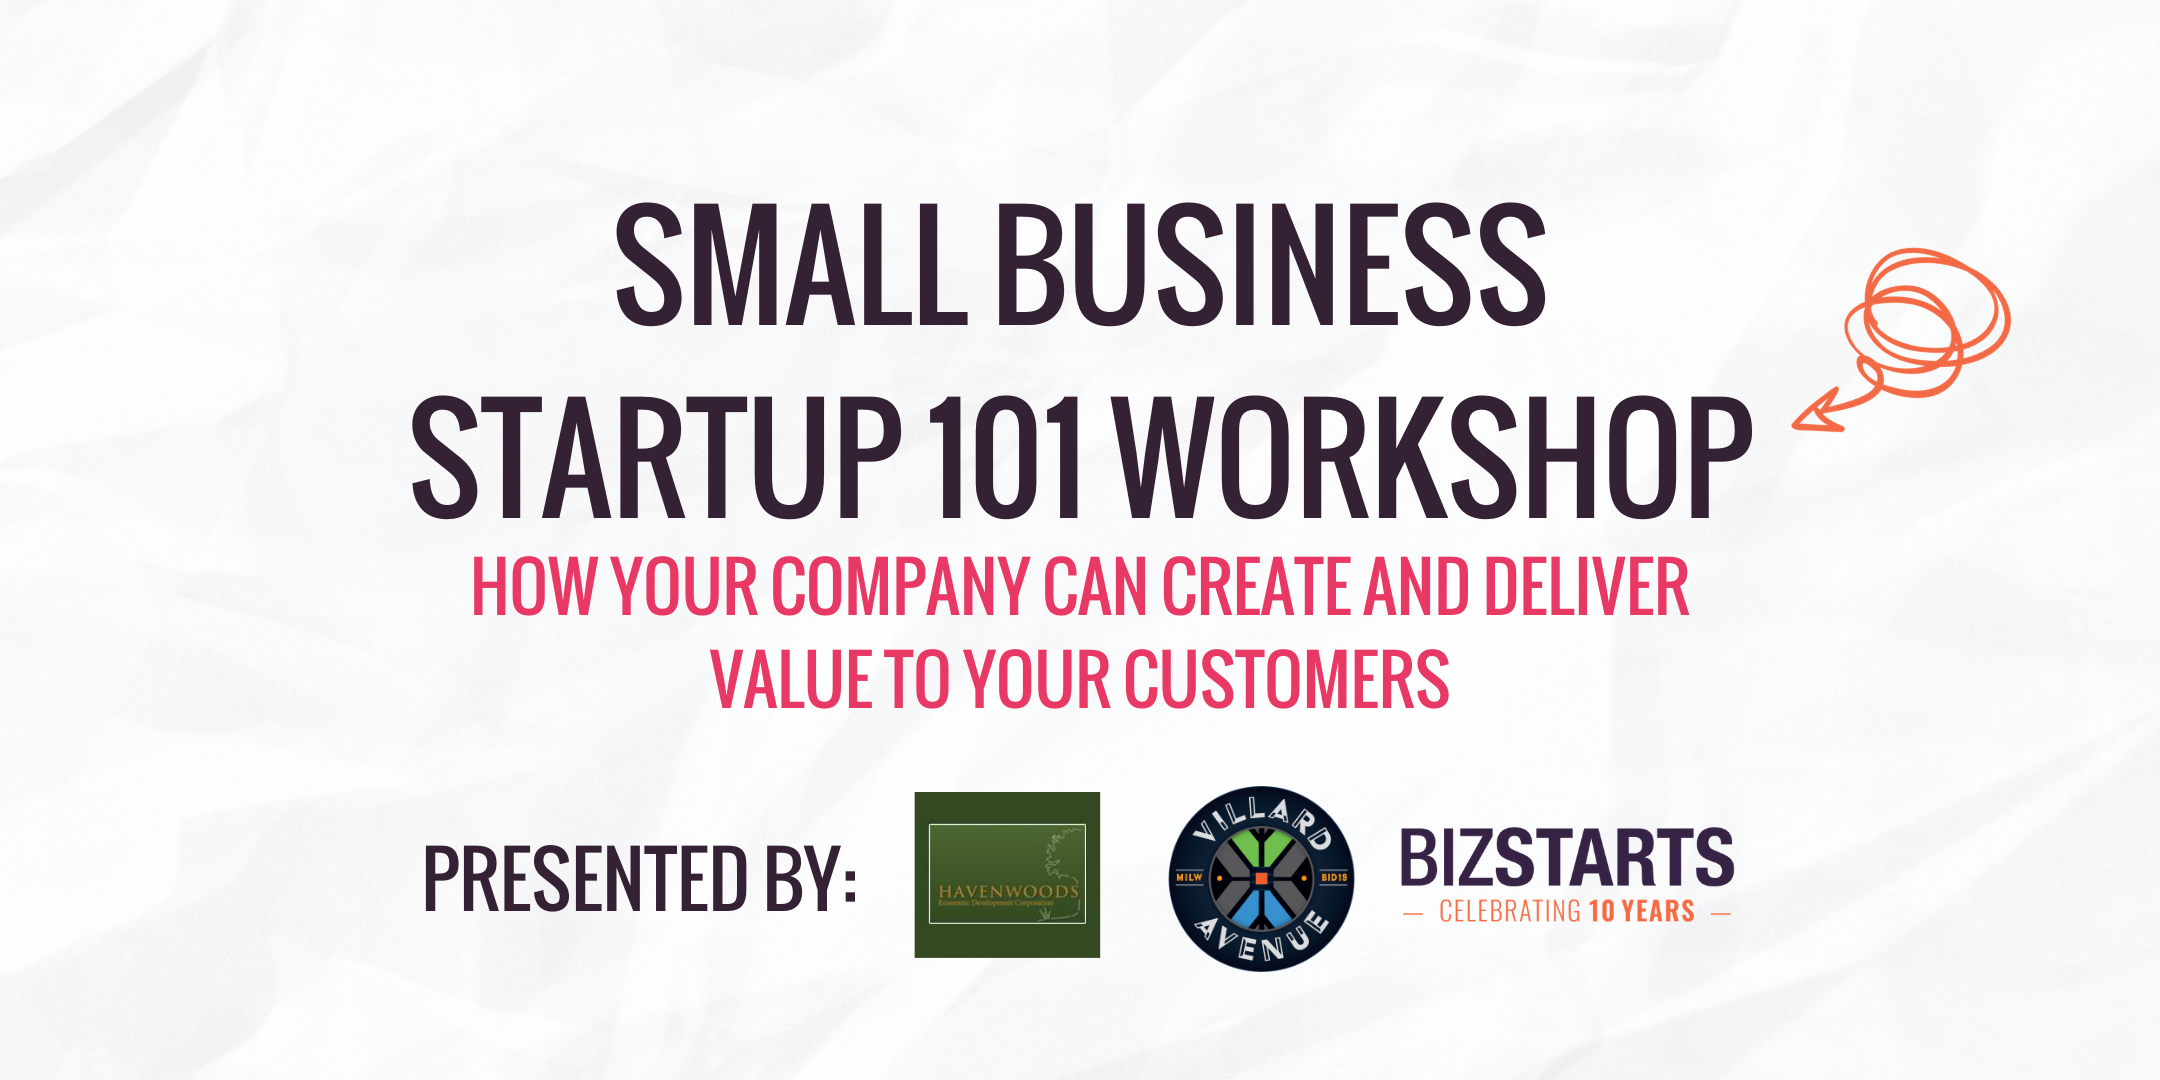 Small Business Startup 101 workshop